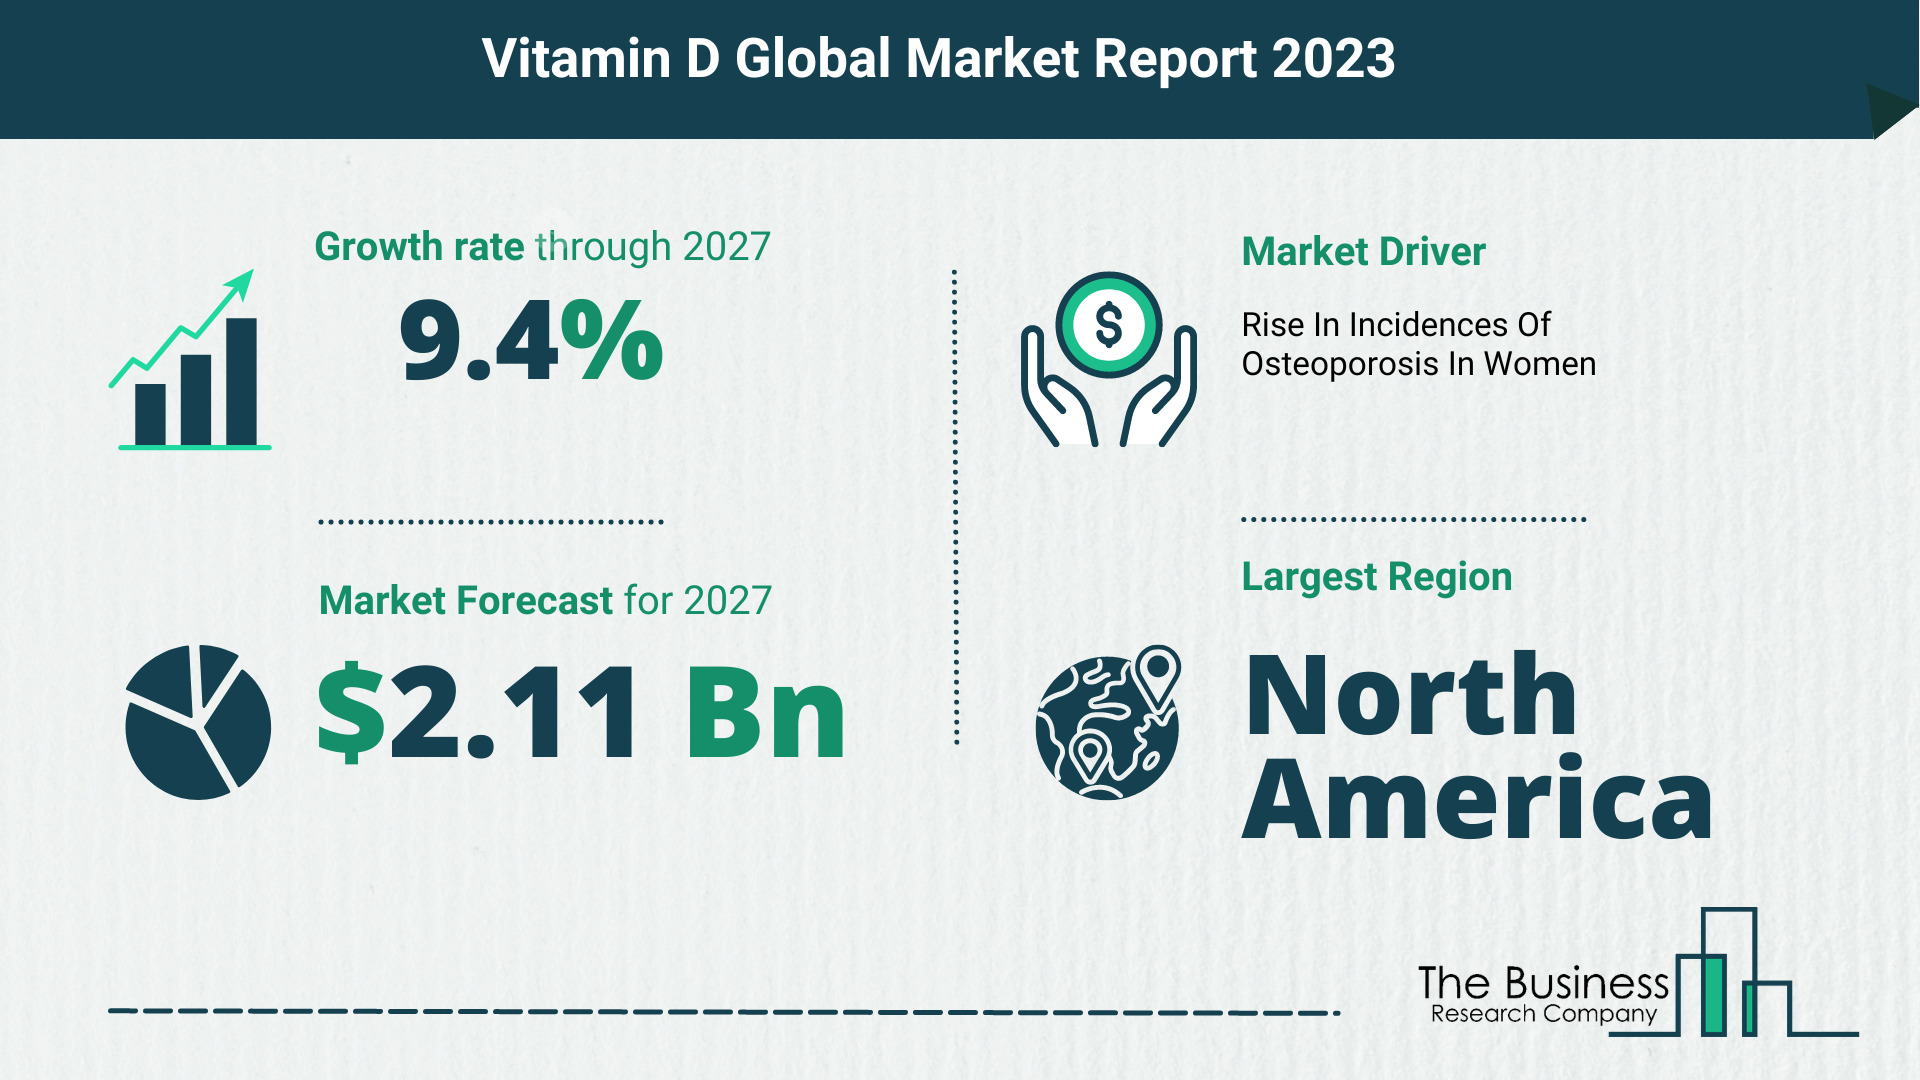 How Will The Vitamin D Market Globally Expand In 2023?